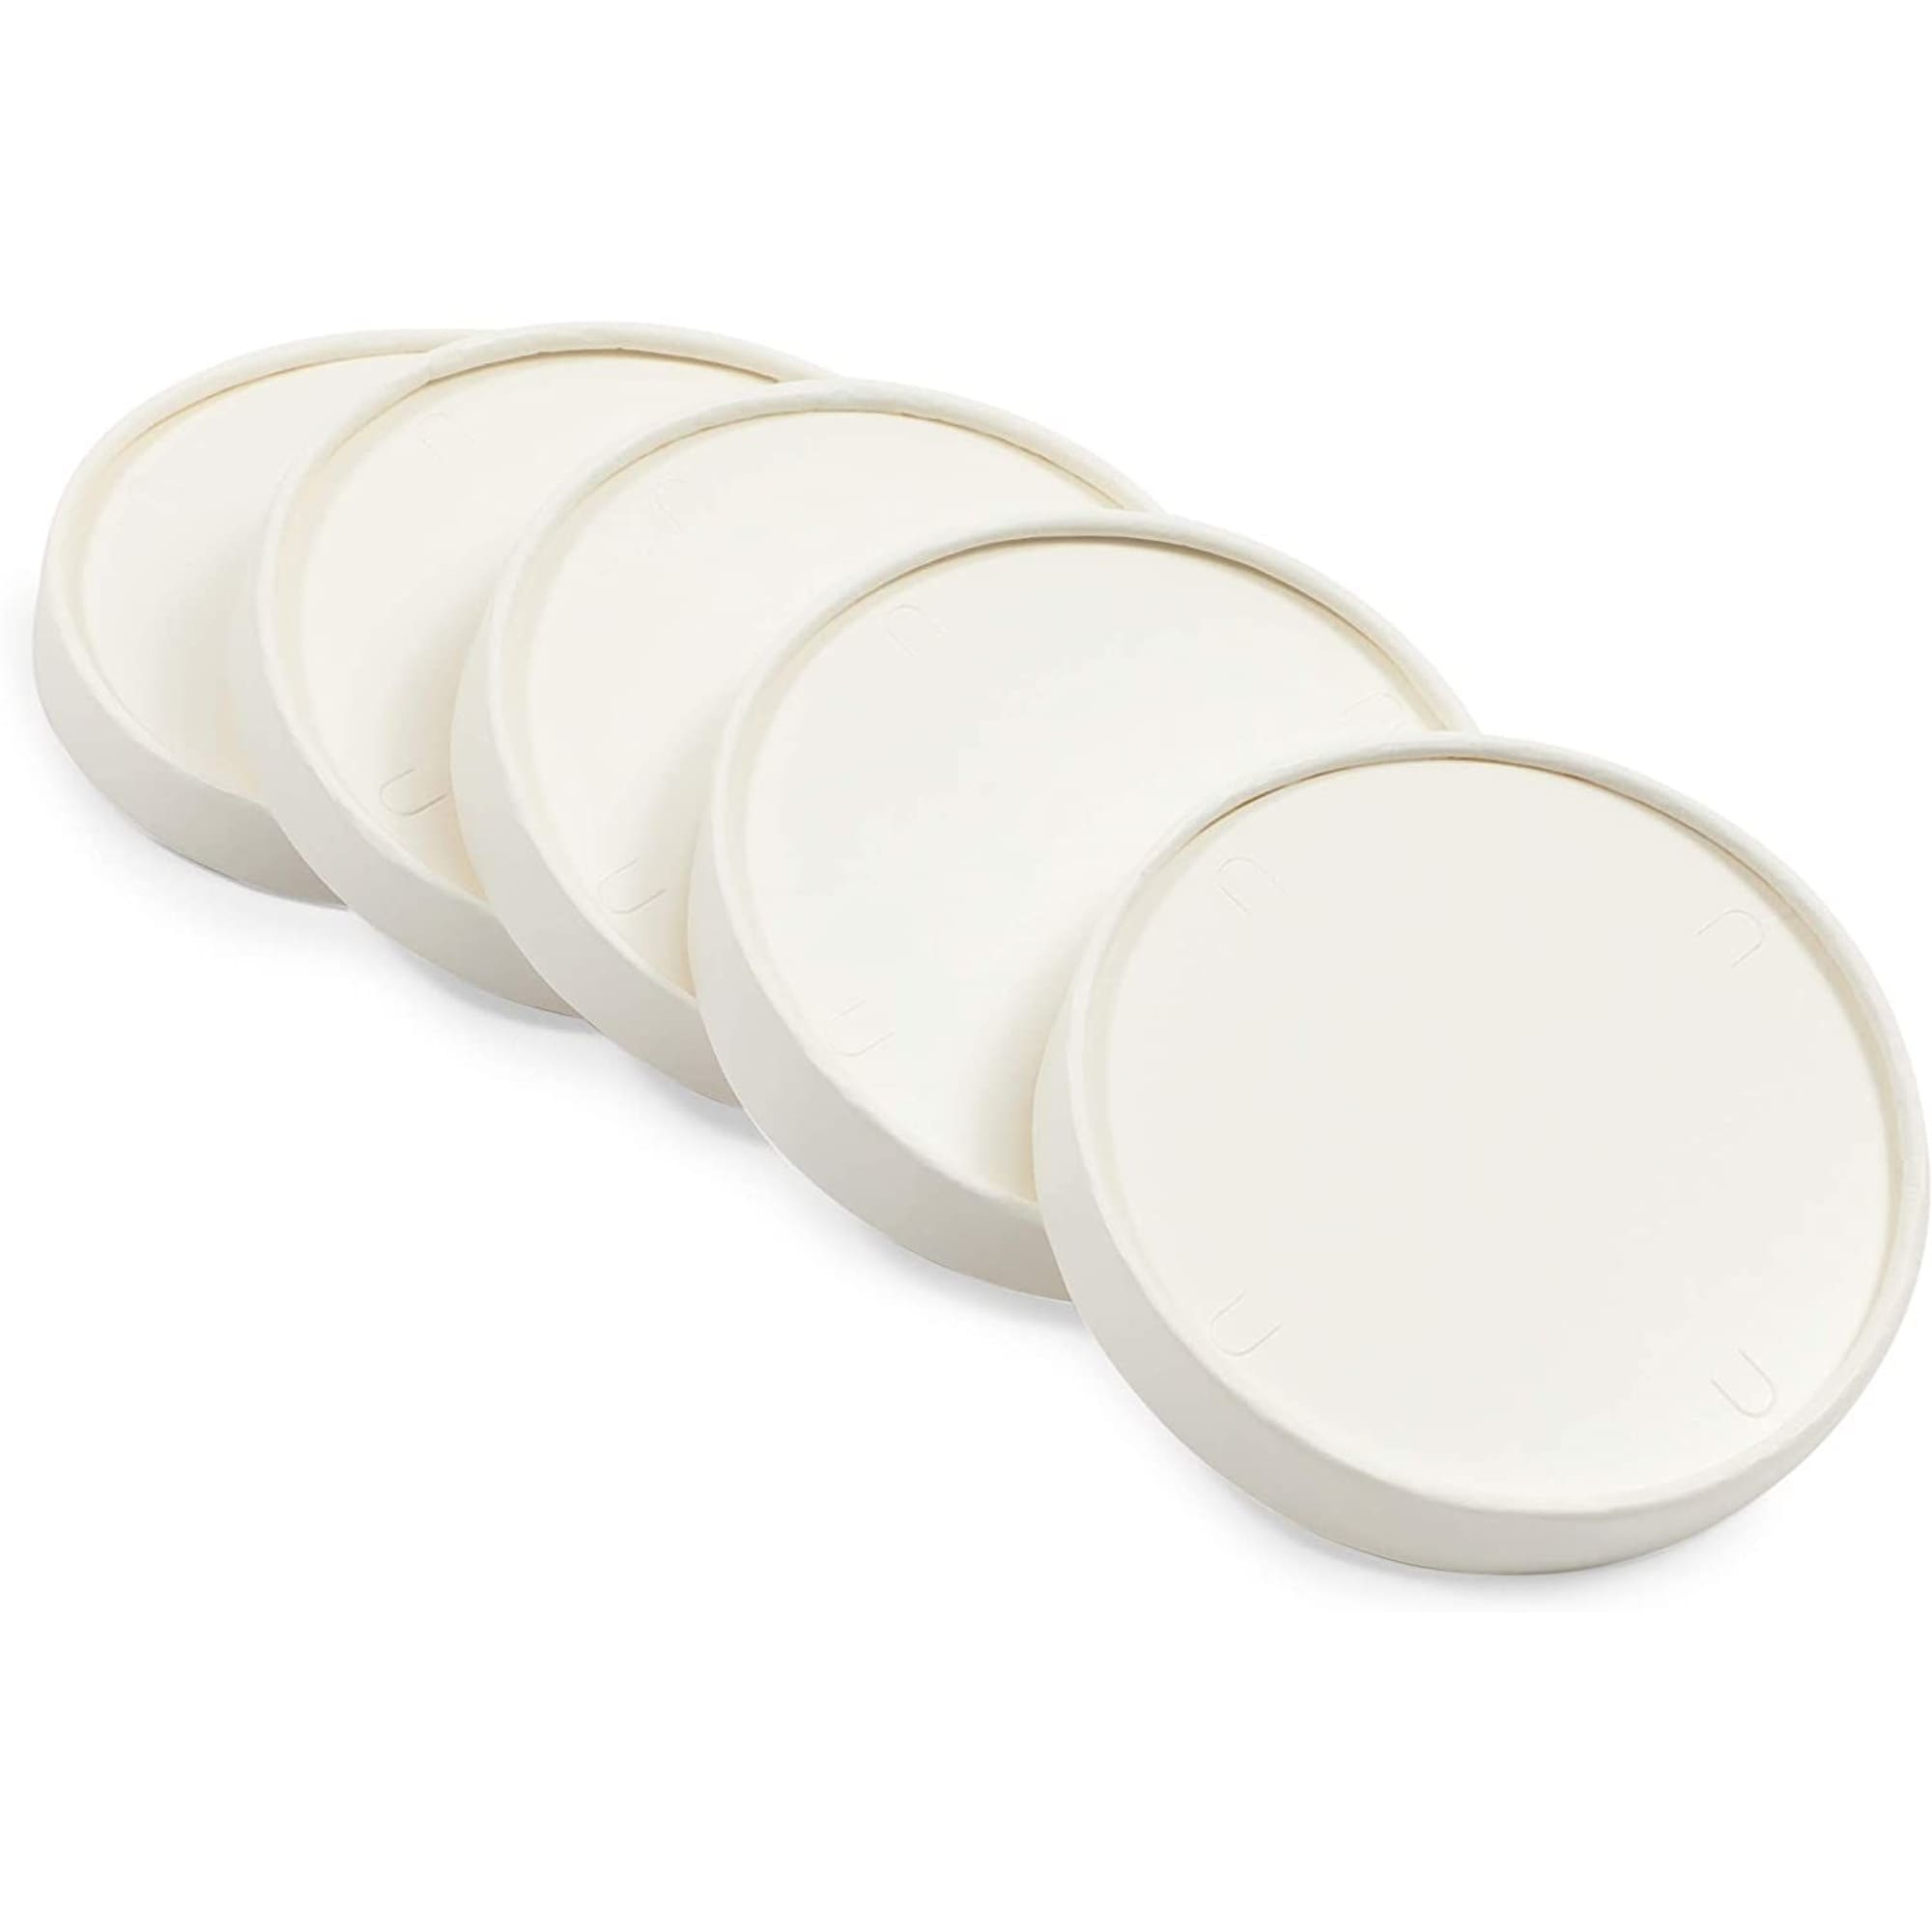 https://ak1.ostkcdn.com/images/products/is/images/direct/9694665f37de4e38d60c4f3676df9880ae523db5/White-Disposable-Soup-Containers-with-Lids-for-To-Go-Food-%2816-oz%2C-36-Pack%29.jpg